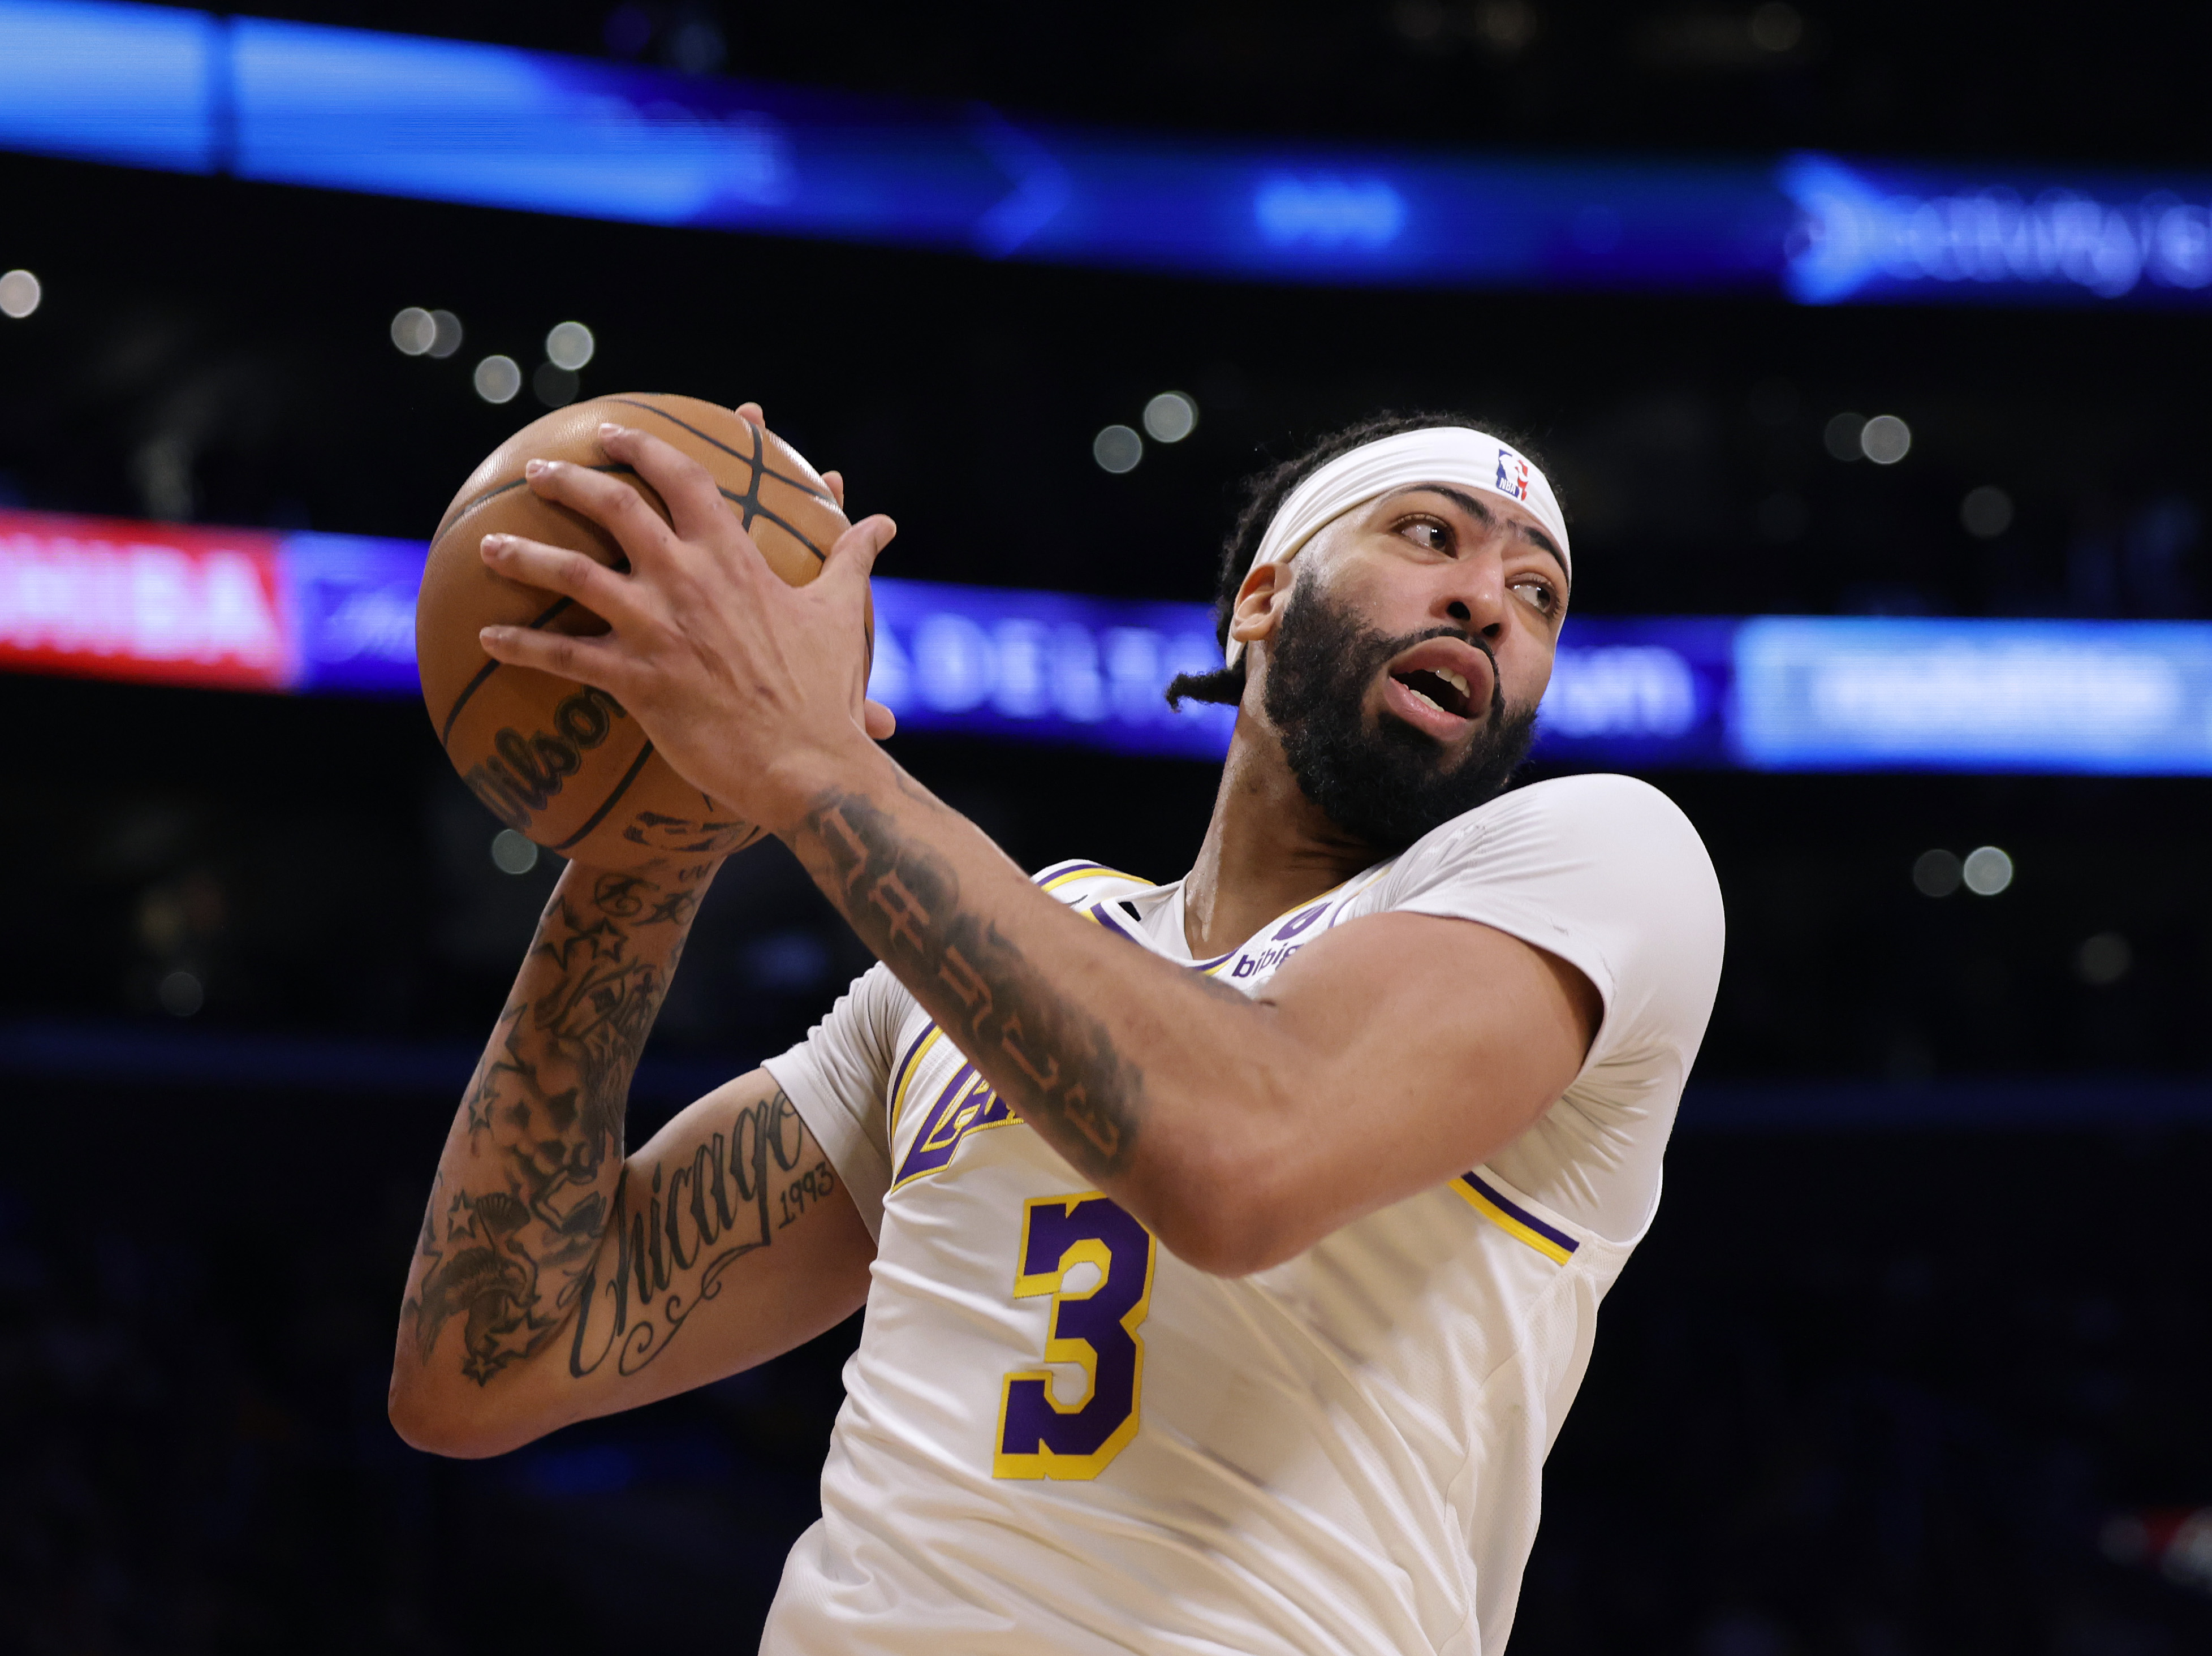 NBA picks: Best Same Game Parlays for Nuggets vs. Lakers Game 4